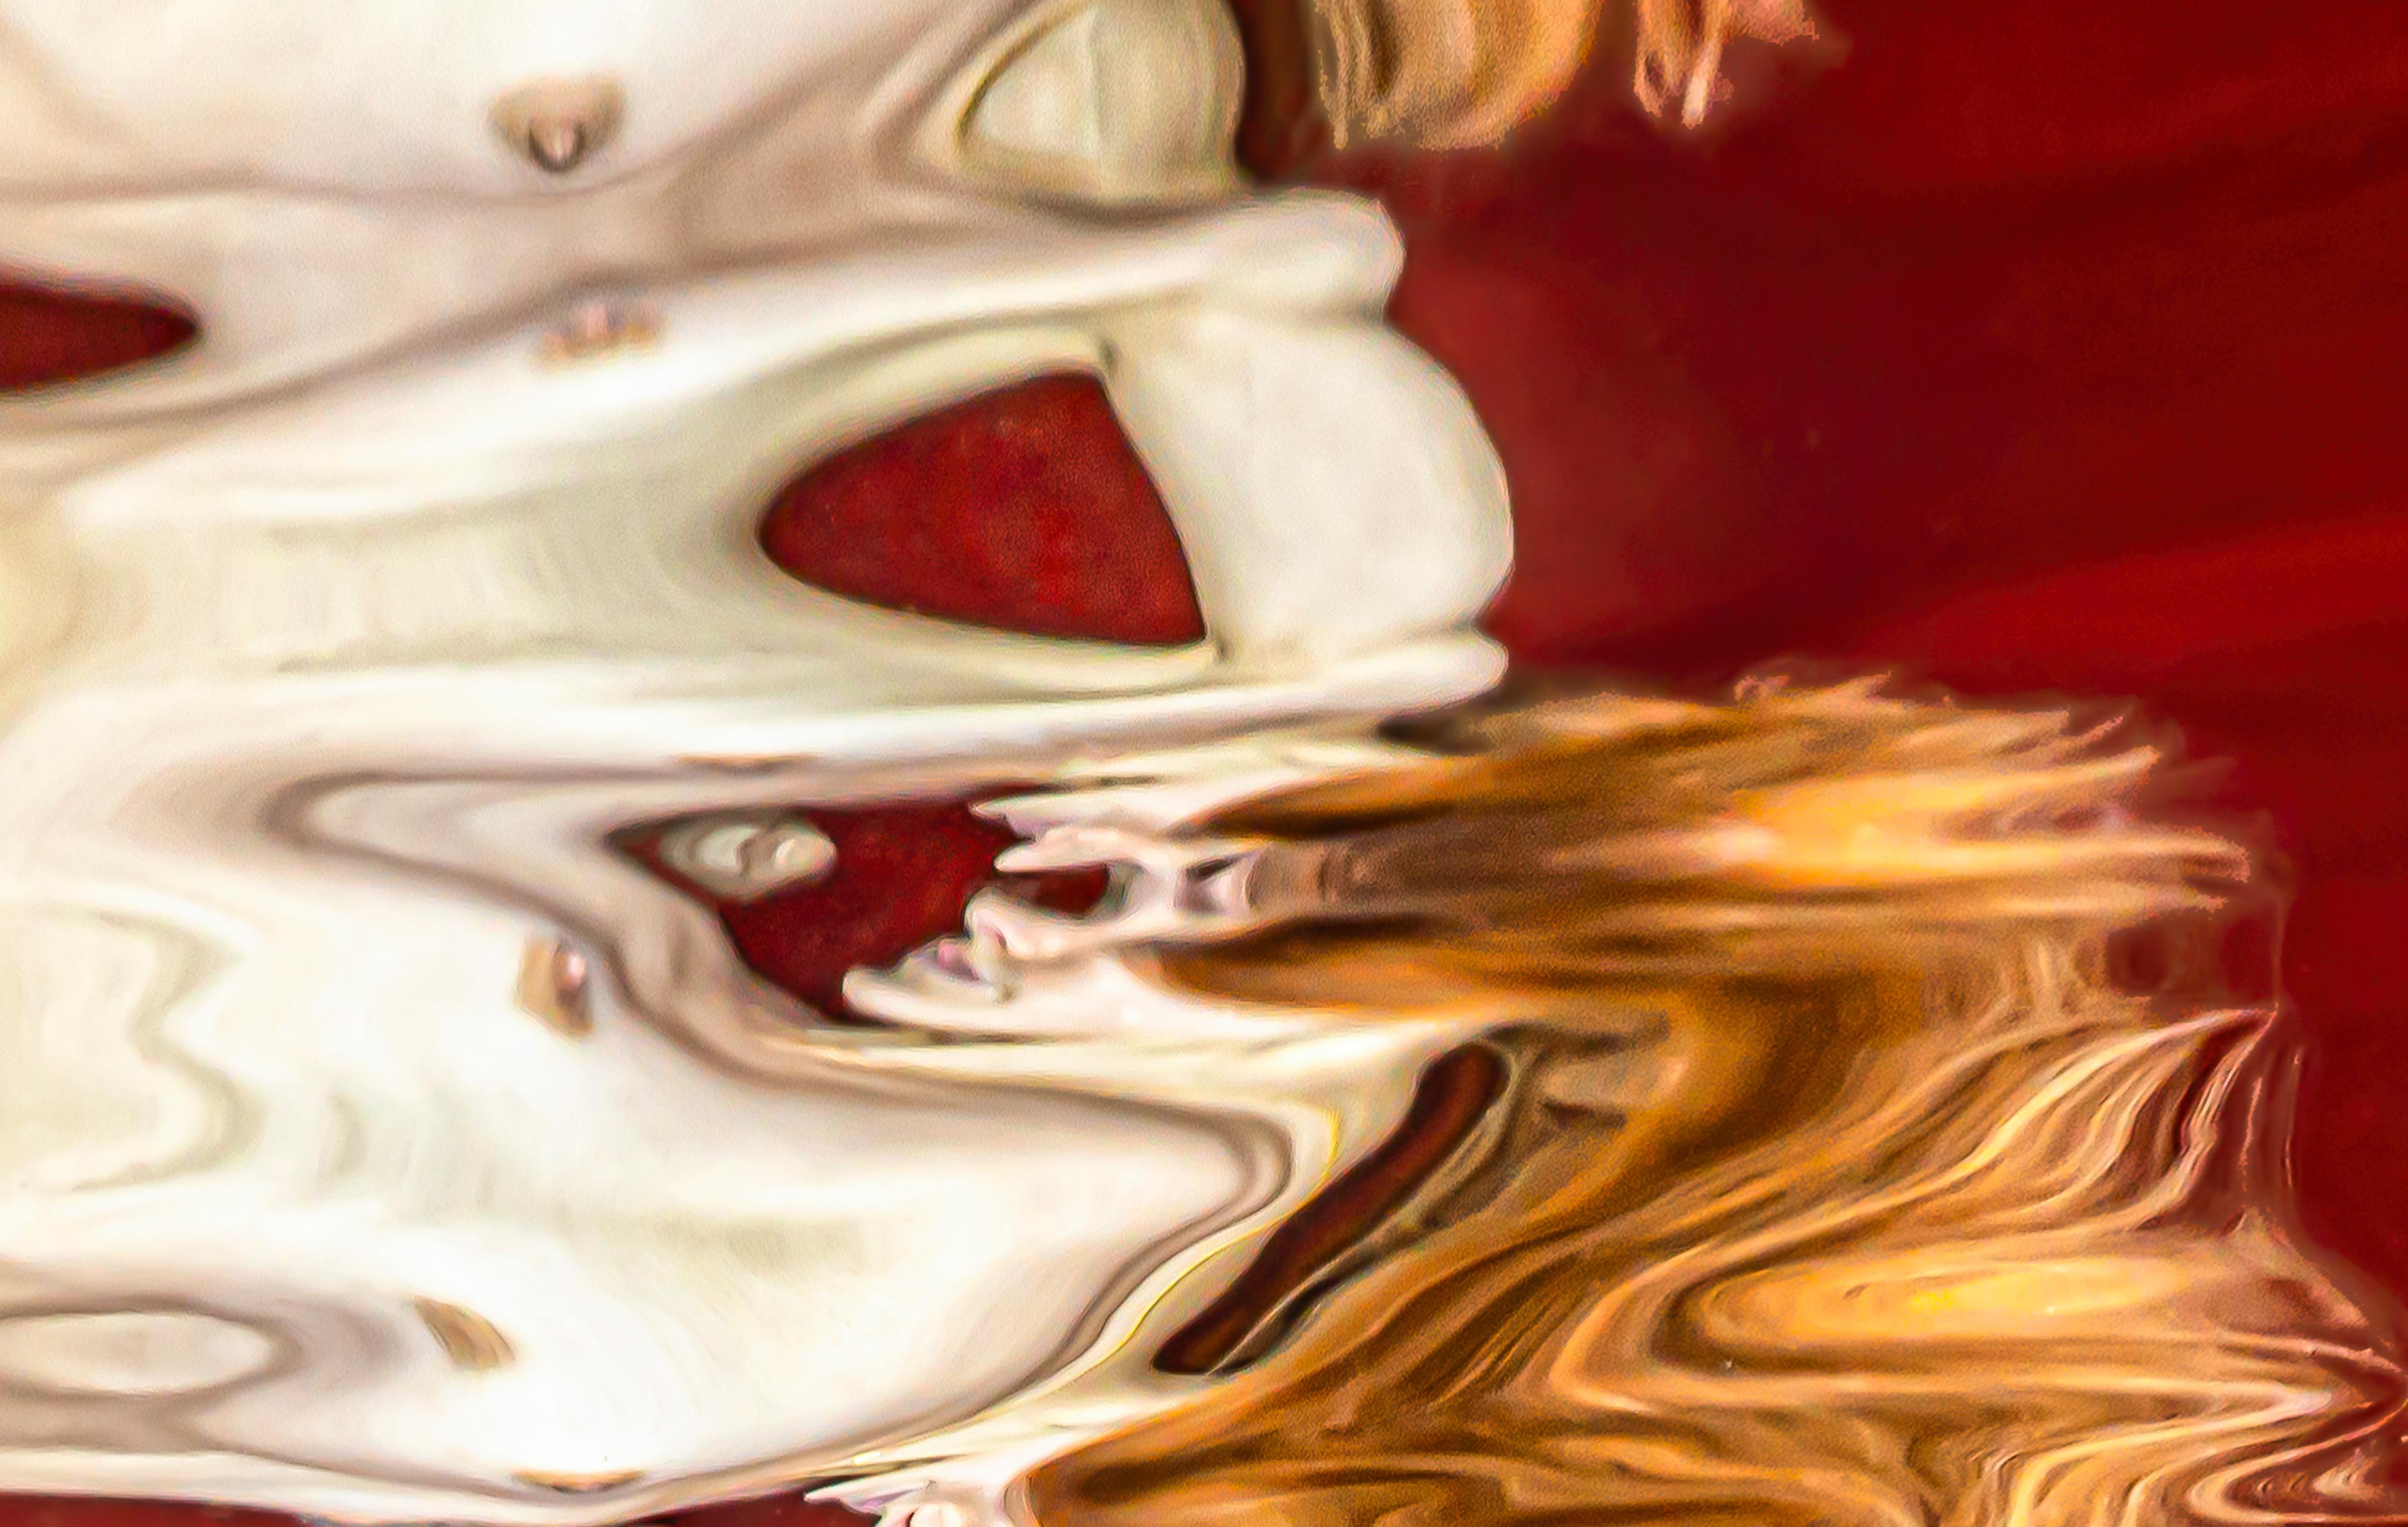 Spark - underwater nude photograph - series REFLECTIONS - archival pigment print - Photograph by Alex Sher